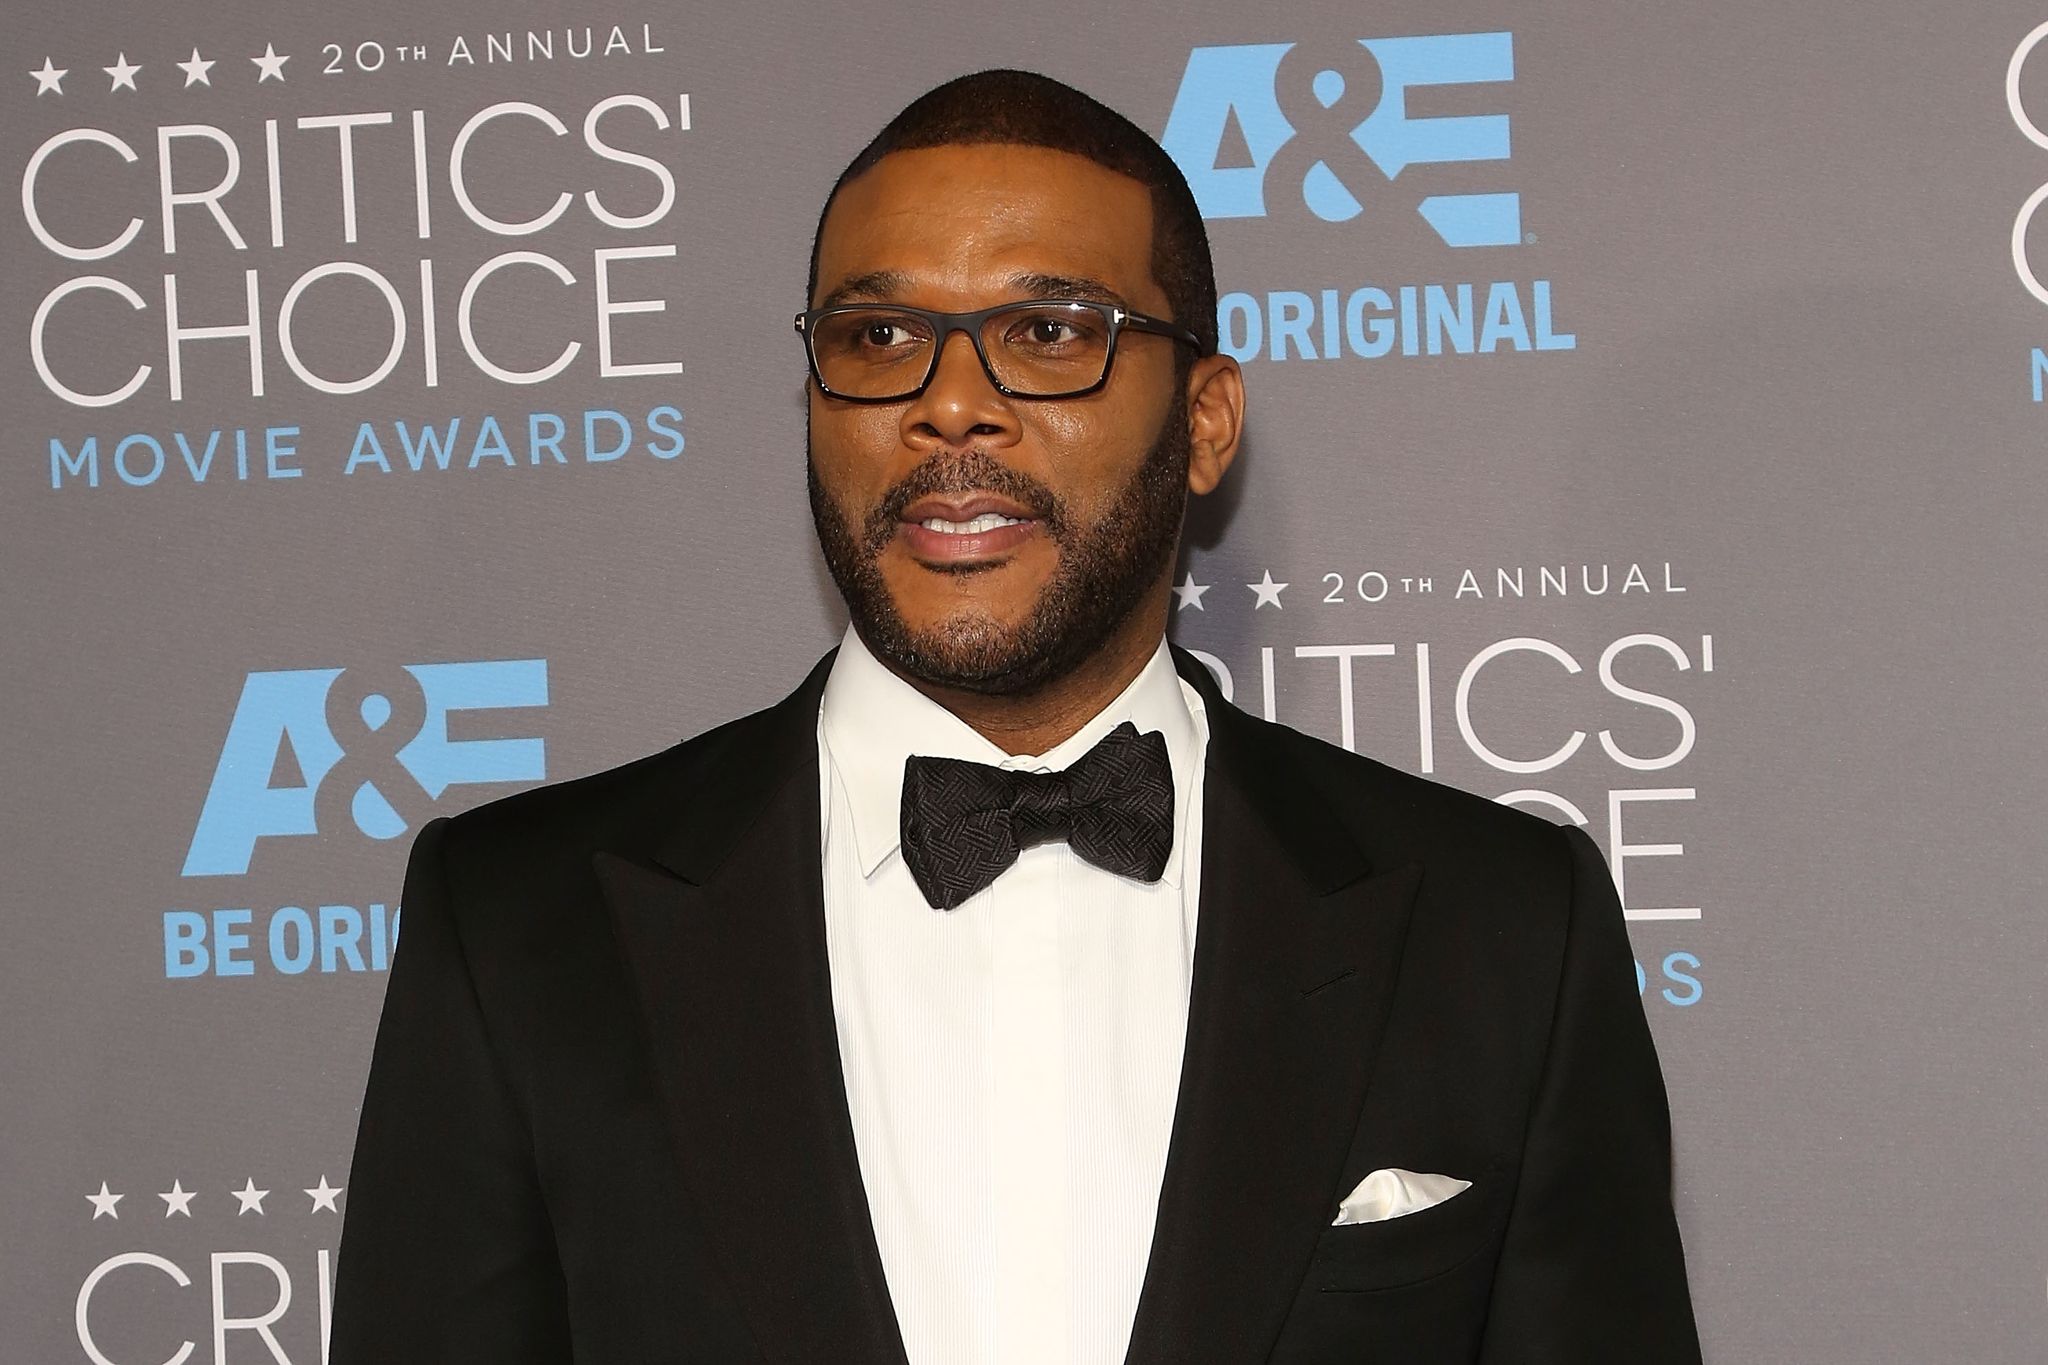 Tyler Perry at the 20th Annual Critics' Choice Movie Awards in 2015 in Los Angeles. | Source: Getty Images